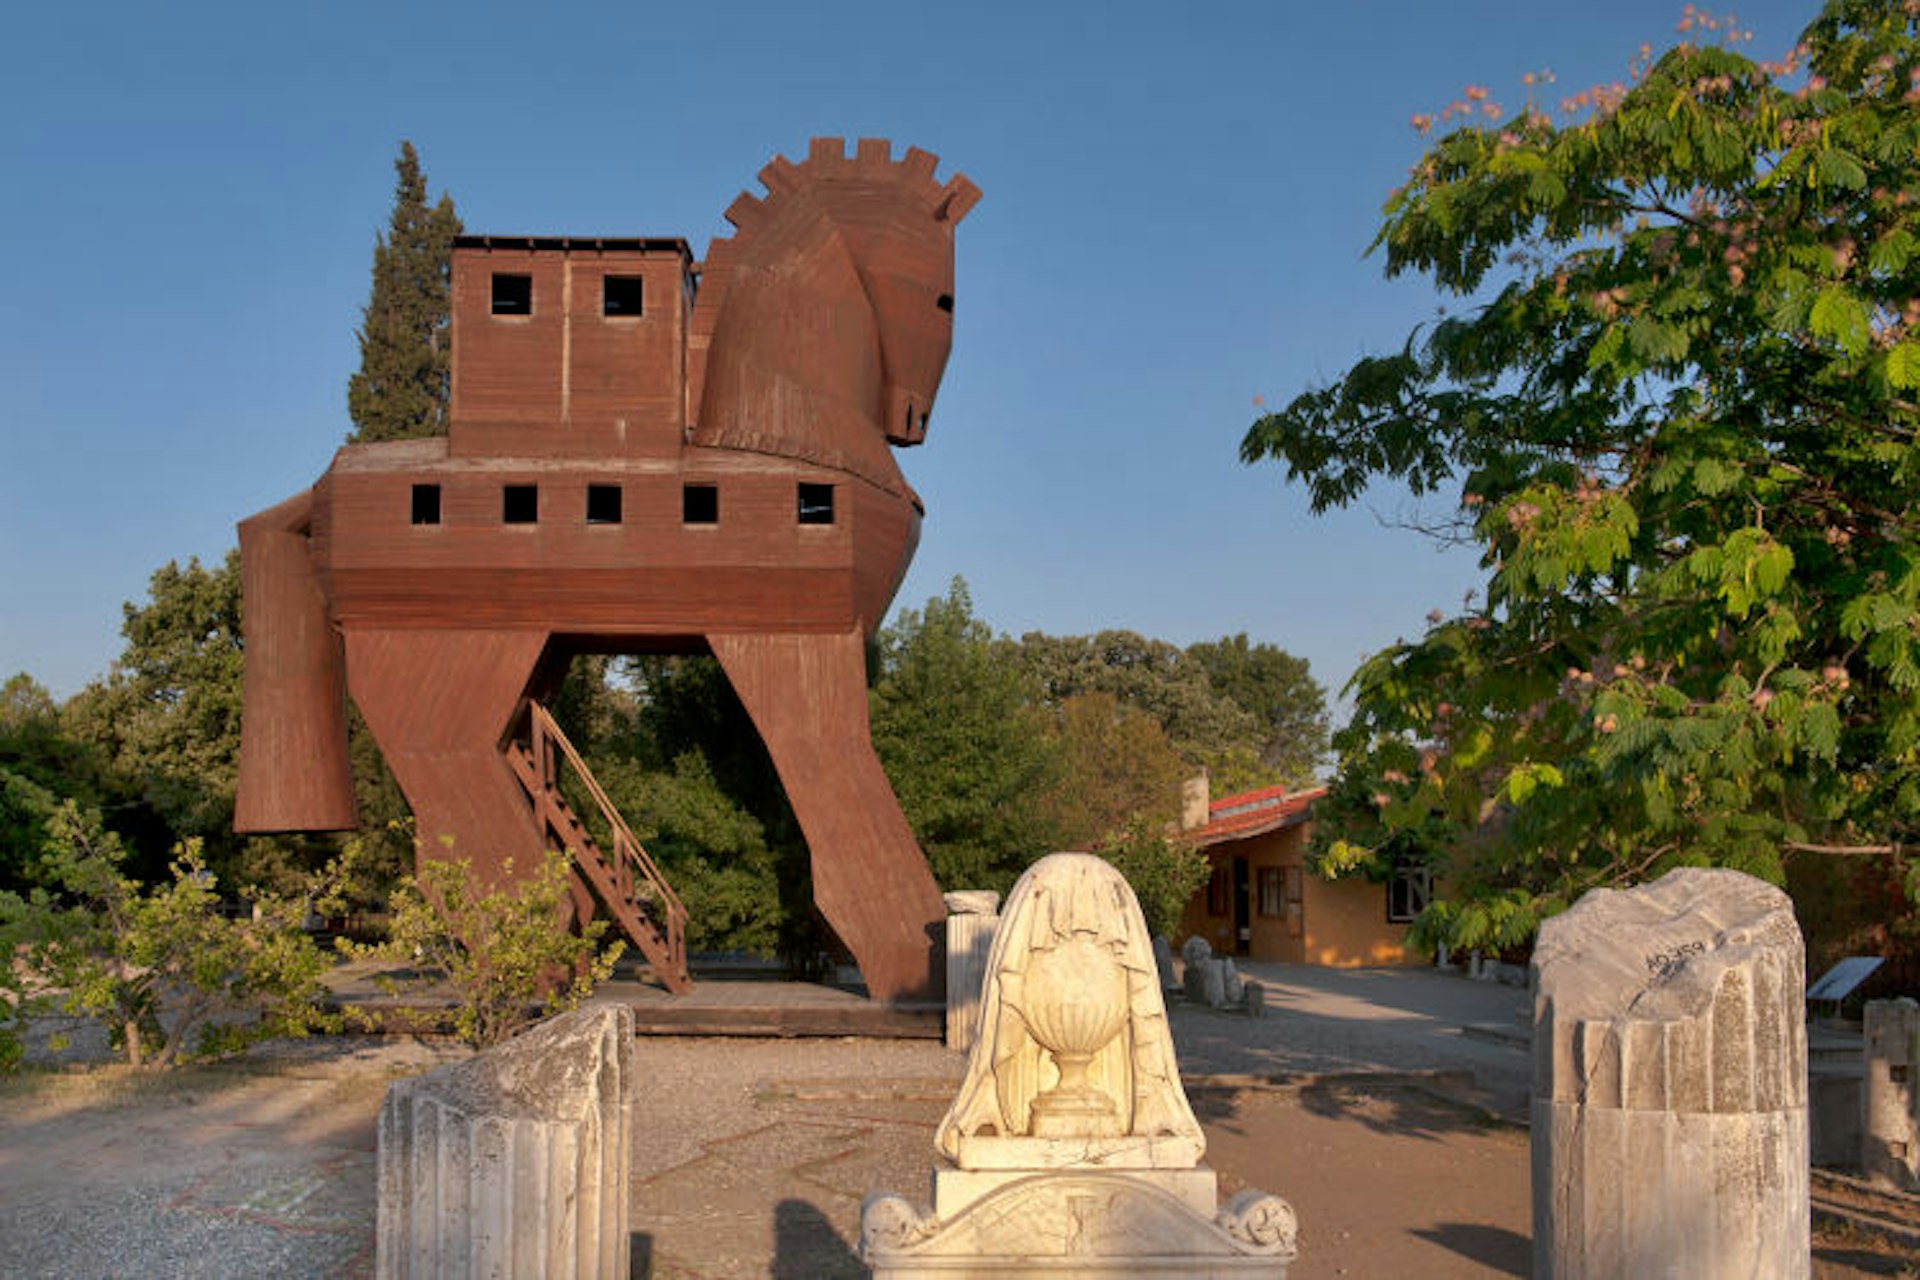 A reproduction of the Trojan Horse at Troy. Image by Izzet Keribar / Lonely Planet Images / Getty Images